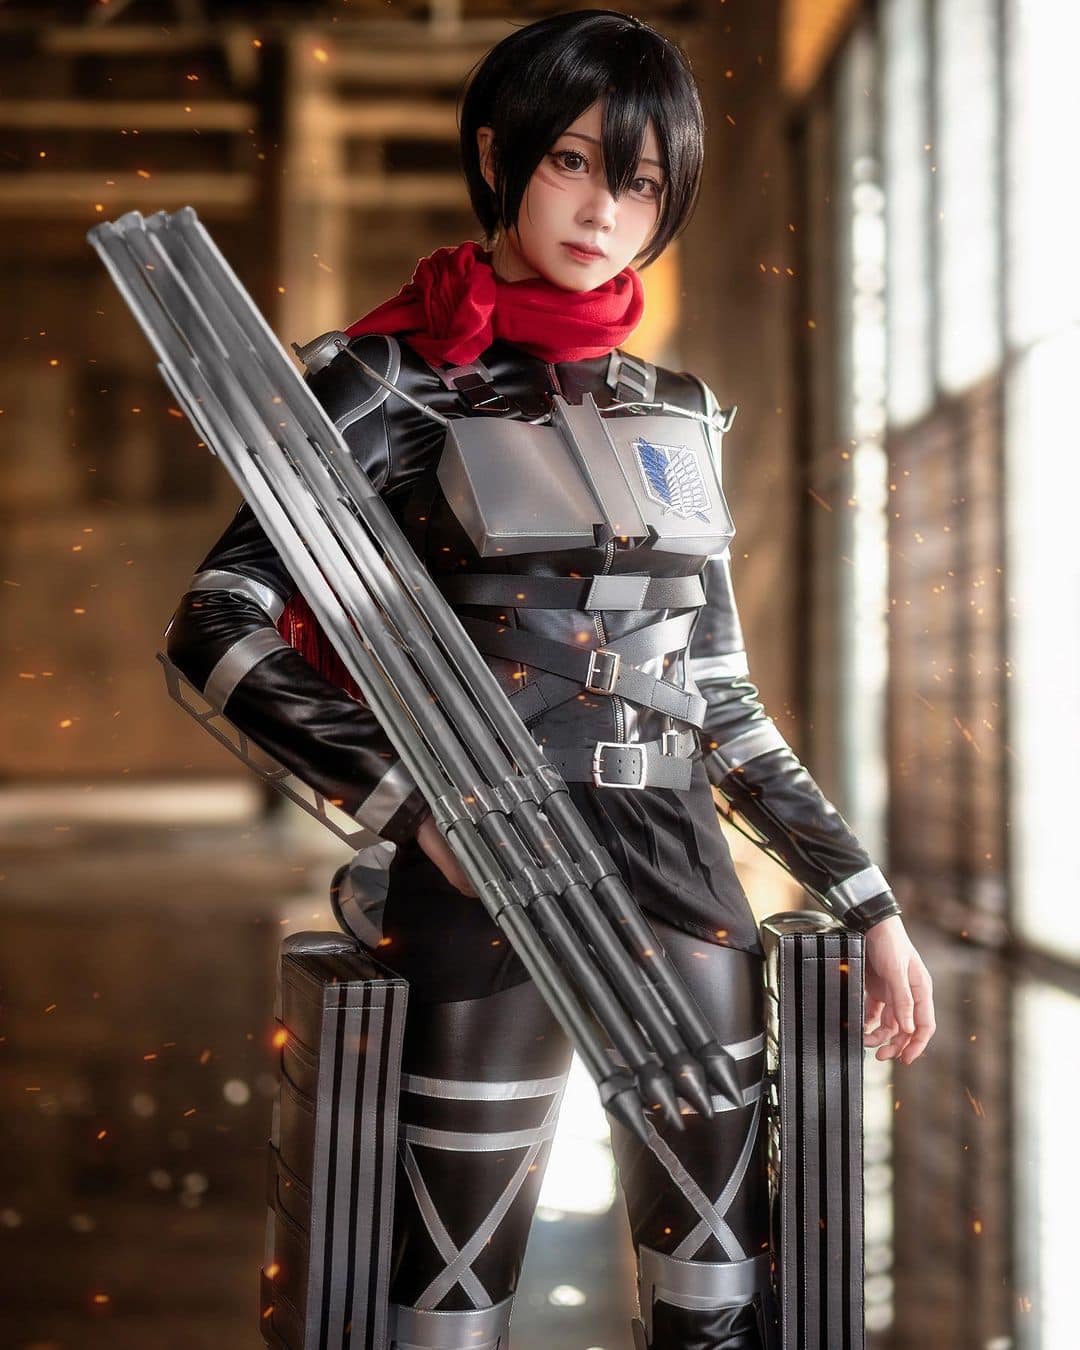 Mikasa Cosplay from Attack On Titan